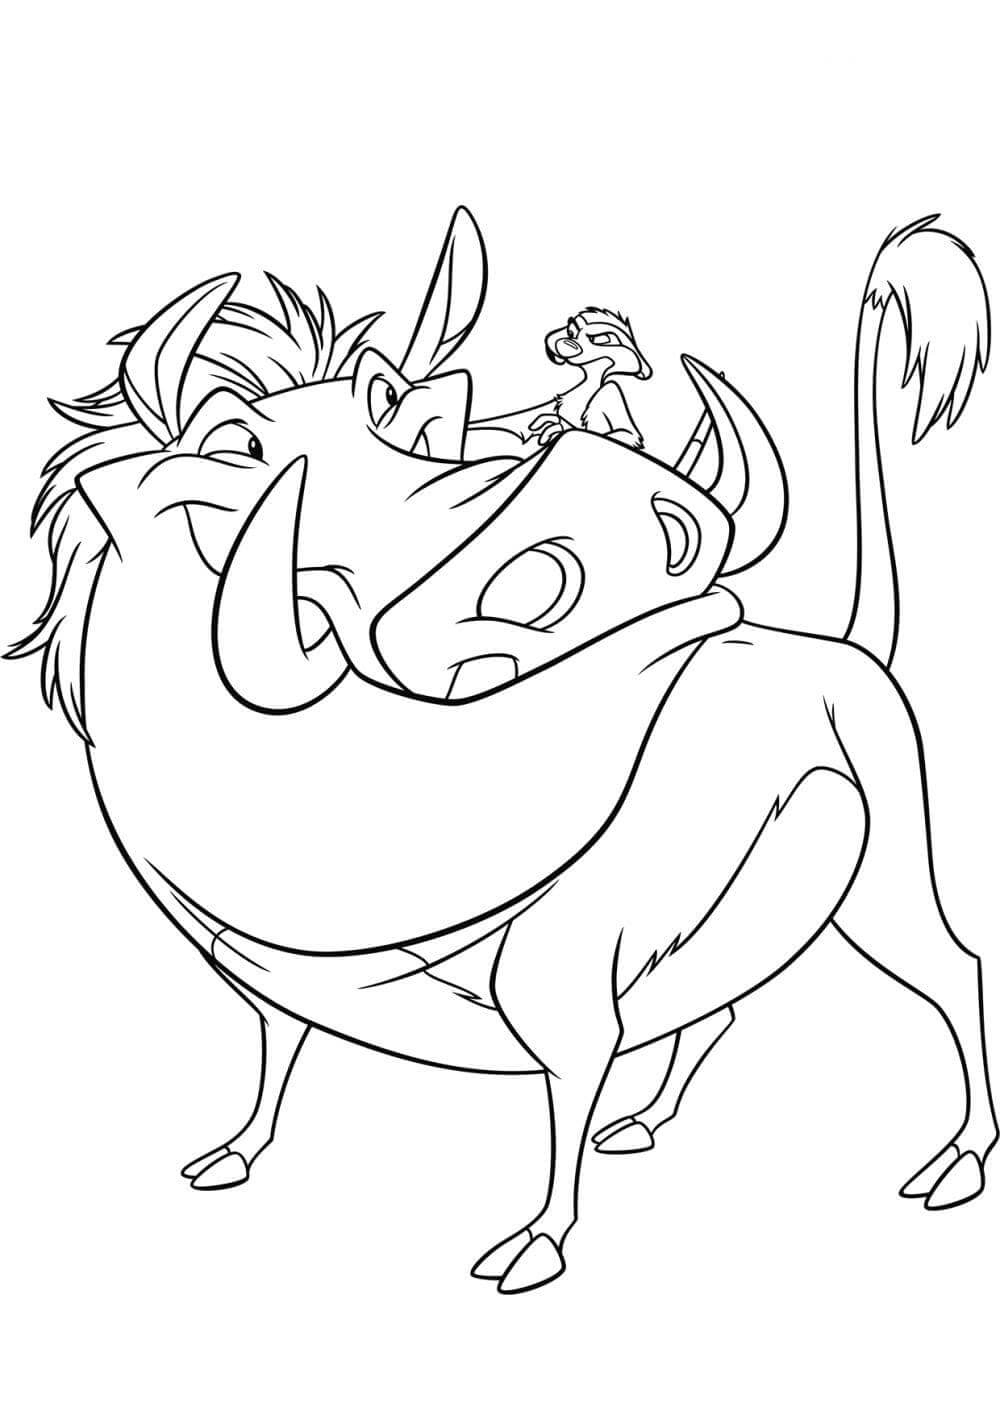 Timon Riding Pumbaa coloring page - Download, Print or Color Online for ...